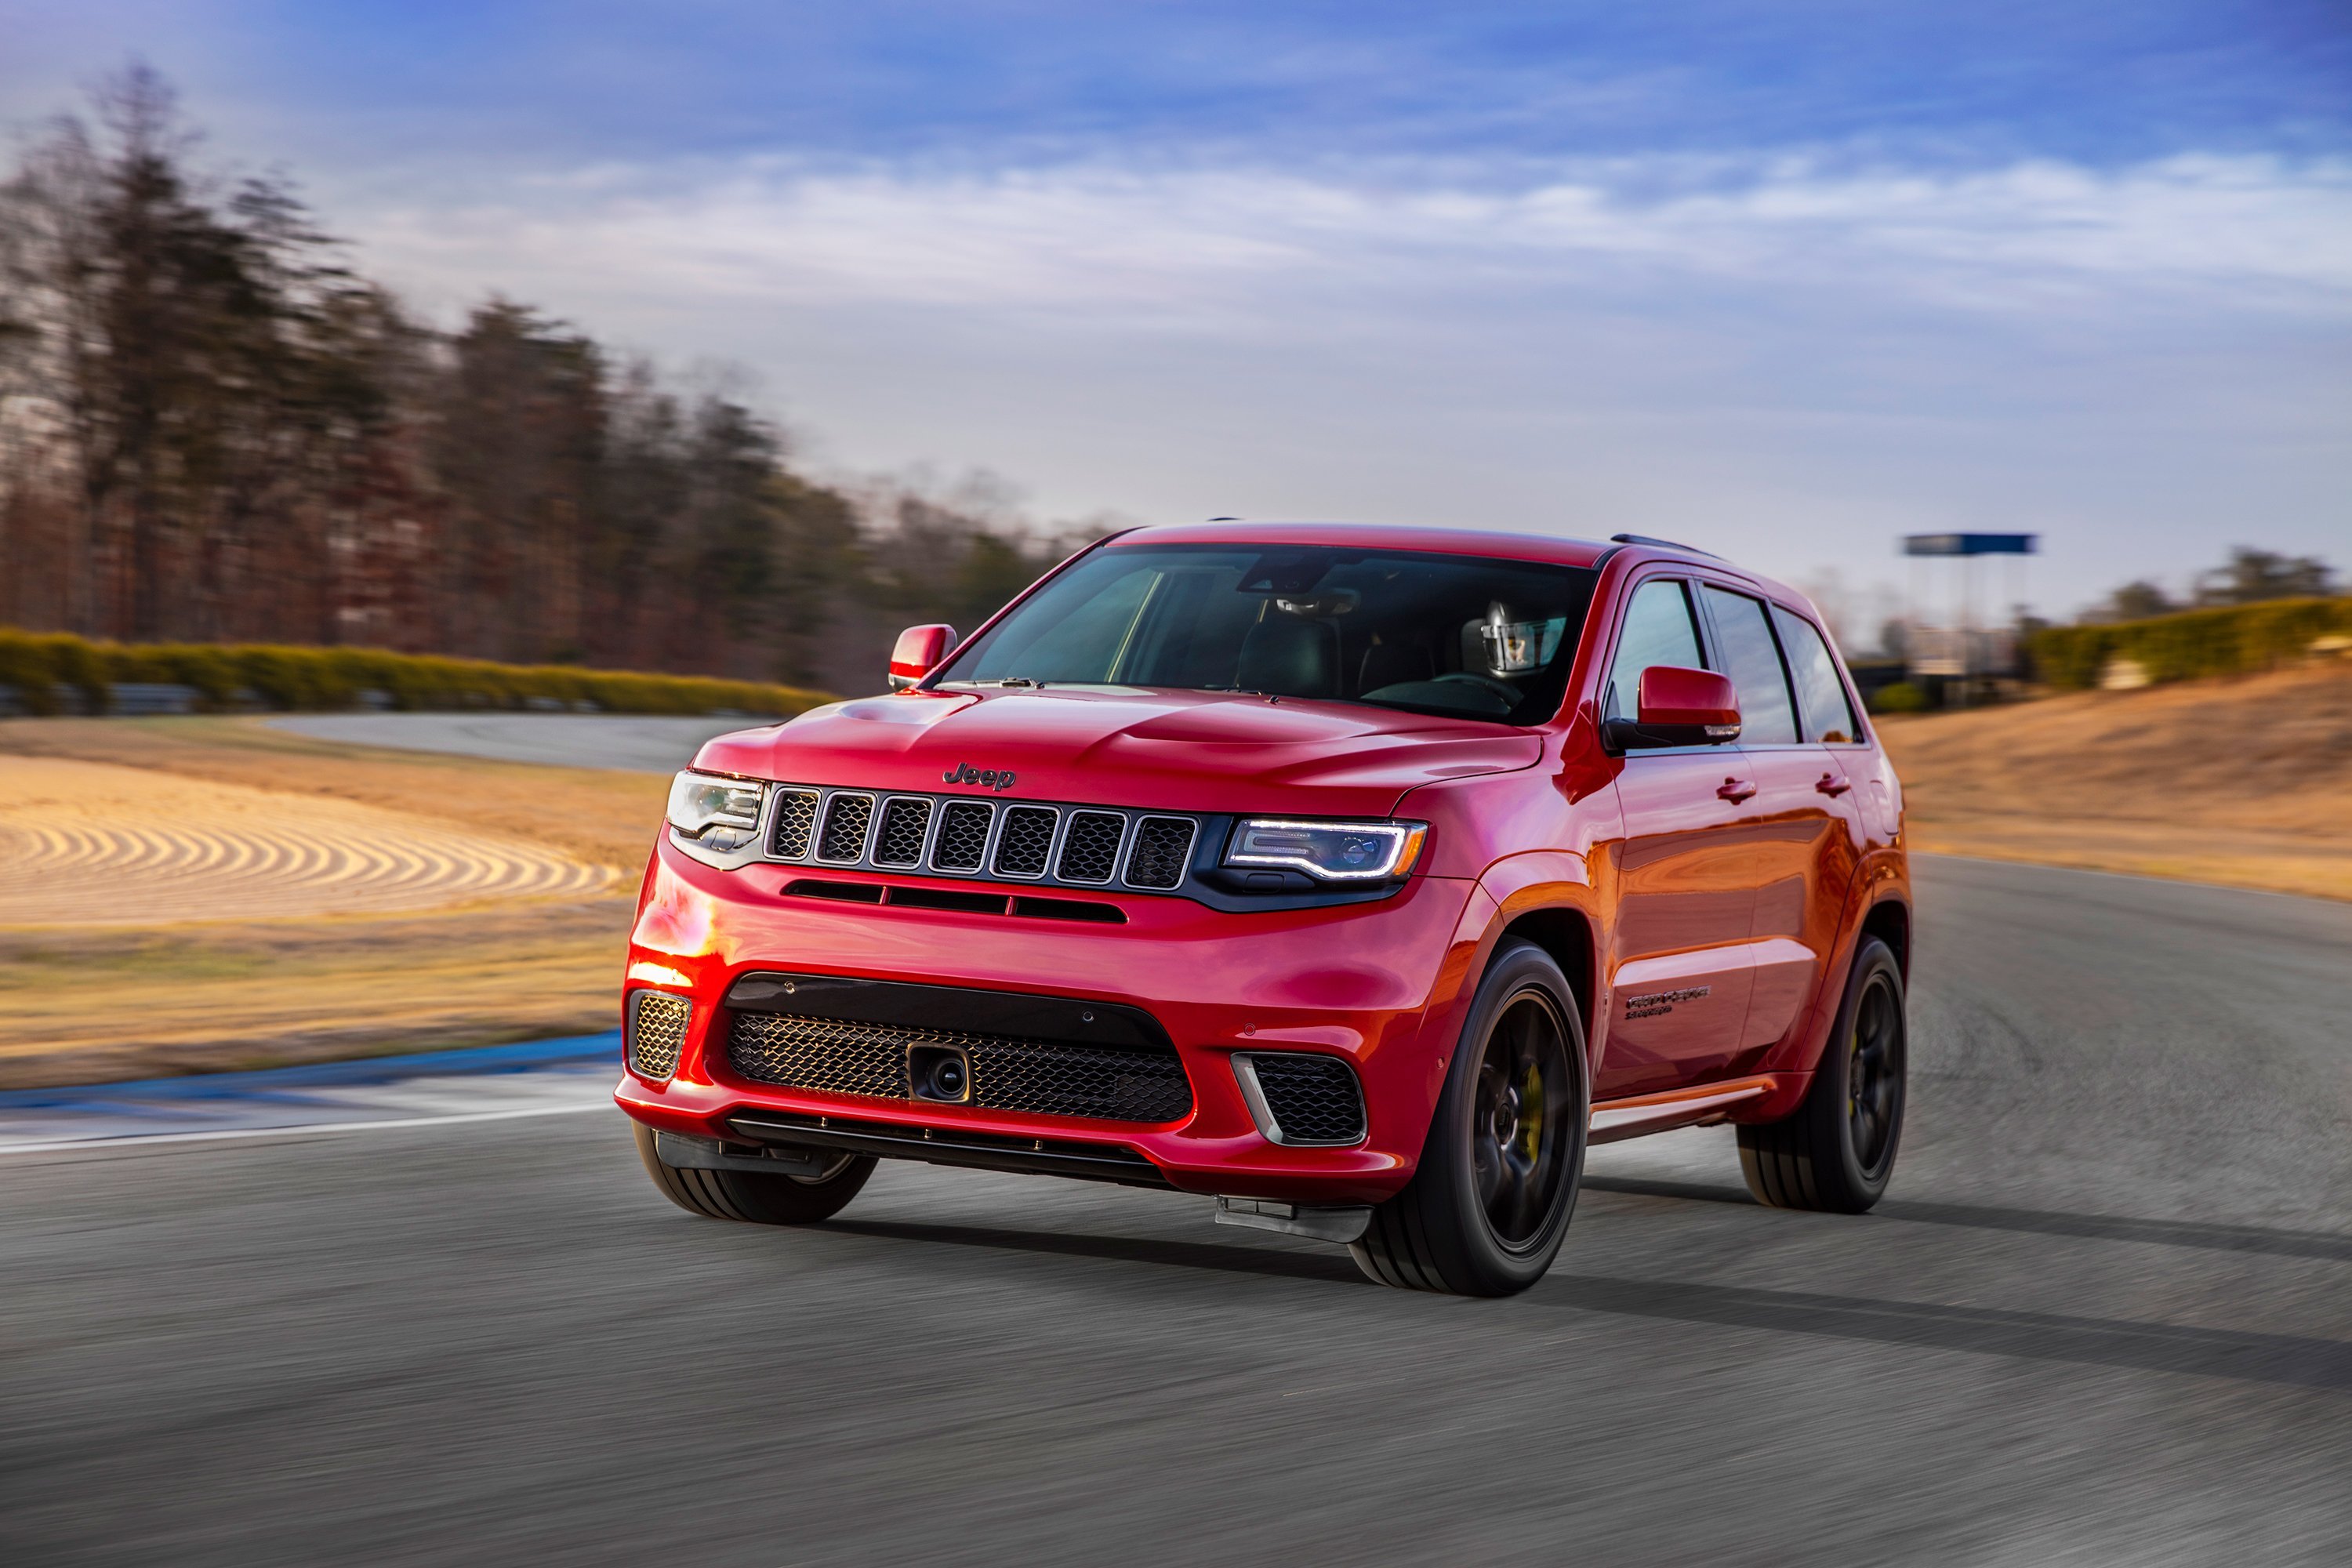 2018 Jeep Grand Cherokee Trackhawk Hd Hd Cars 4k Wallpapers Images Backgrounds Photos And Pictures